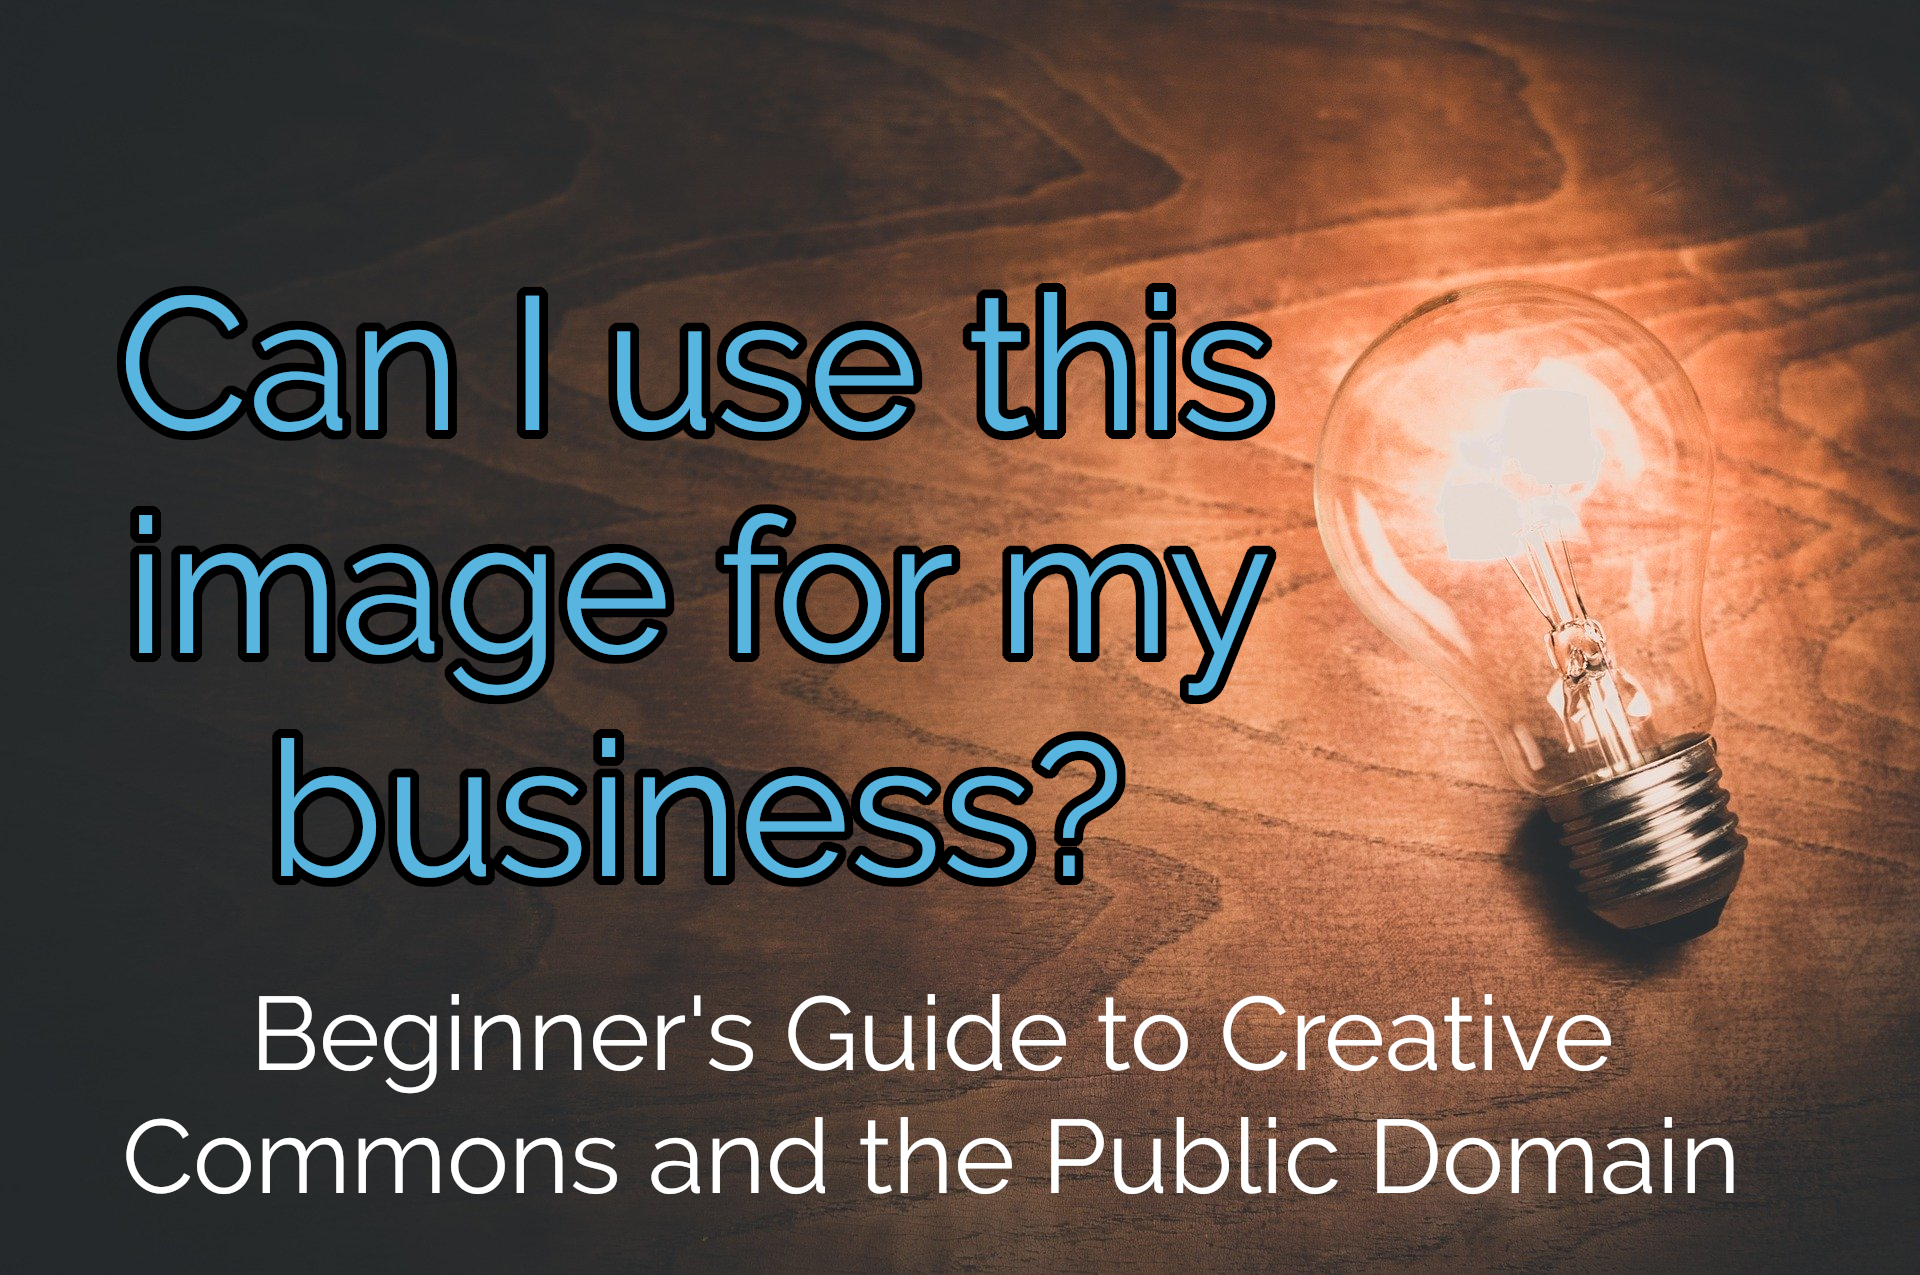 Can I use this image for my business? Beginner's Guide to Creative Commons and the Public Domain. Over a background of a wooden table, with a lightbulb lighting up sitting on it (no wires).